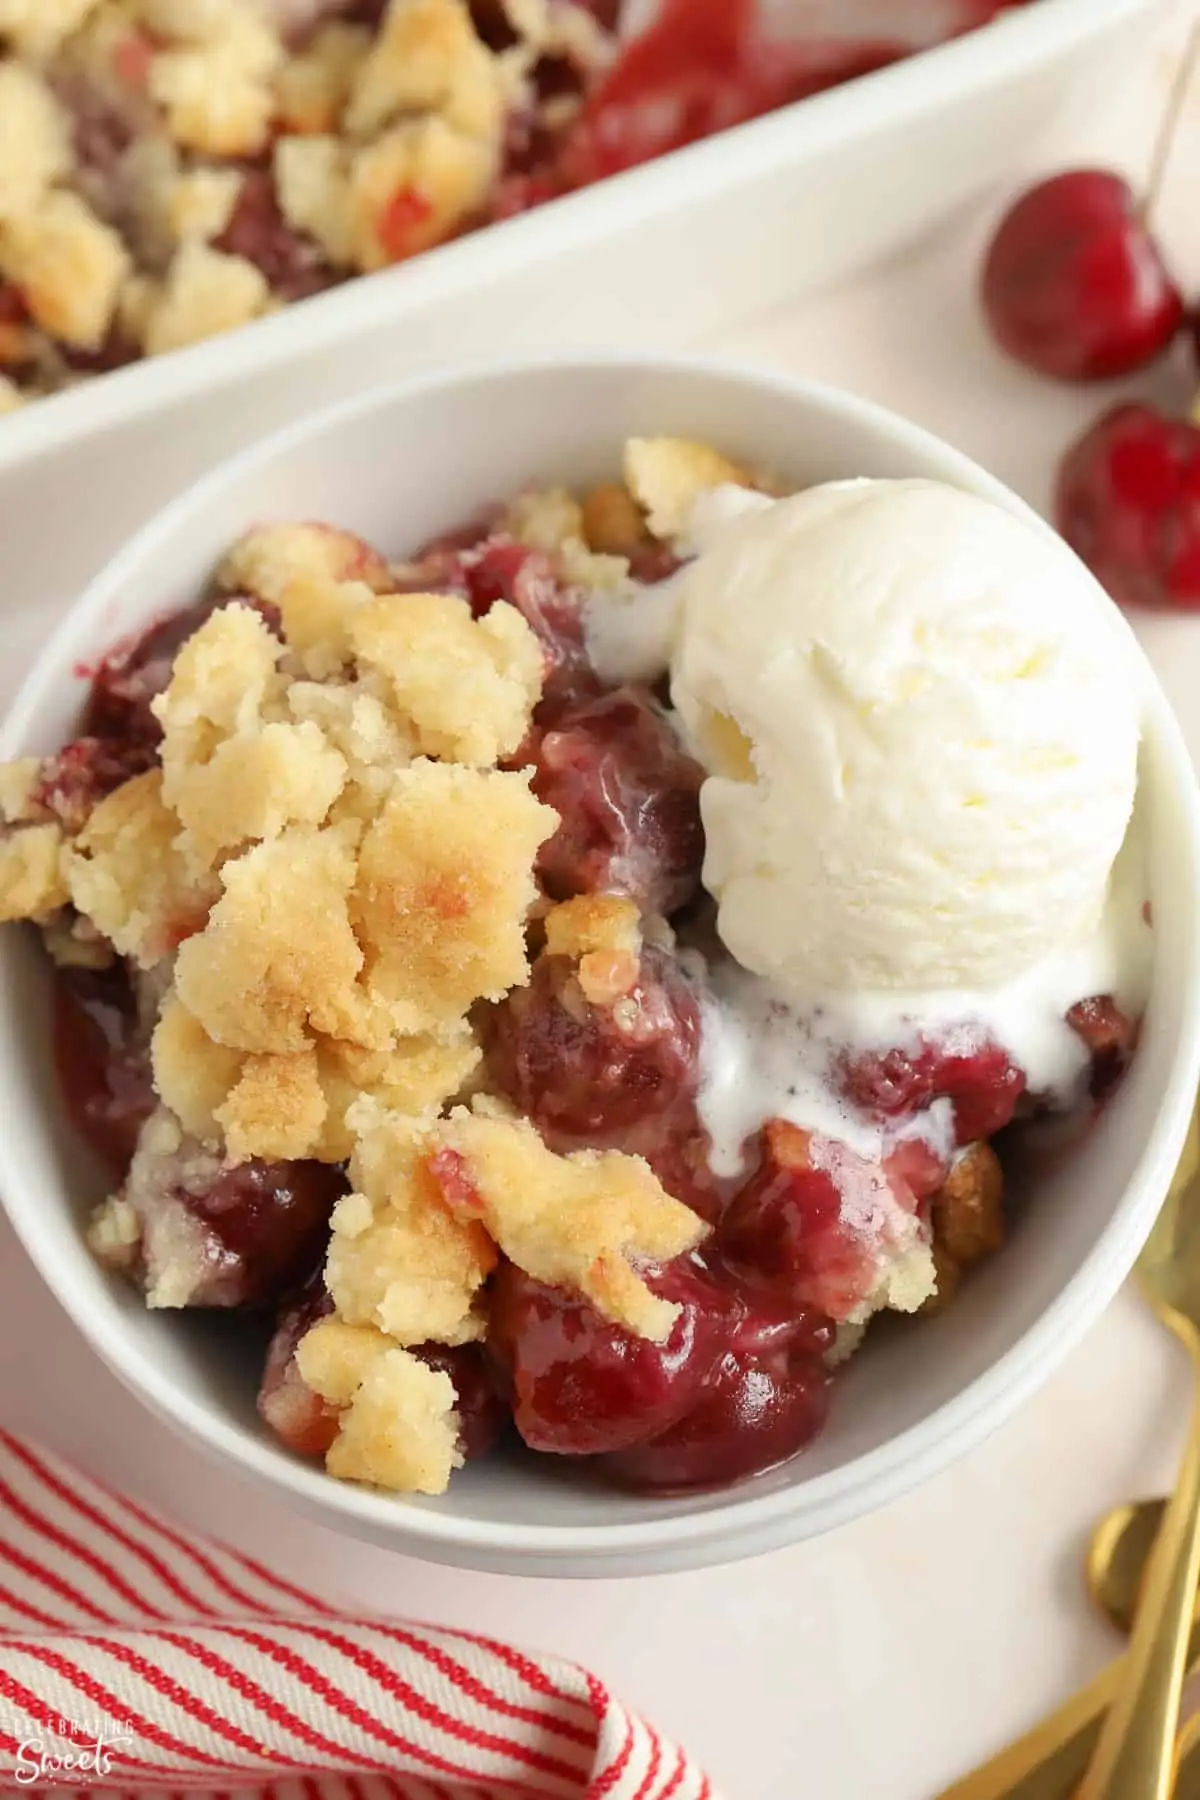 Cherry cobbler in a white bowl topped with vanilla ice cream.